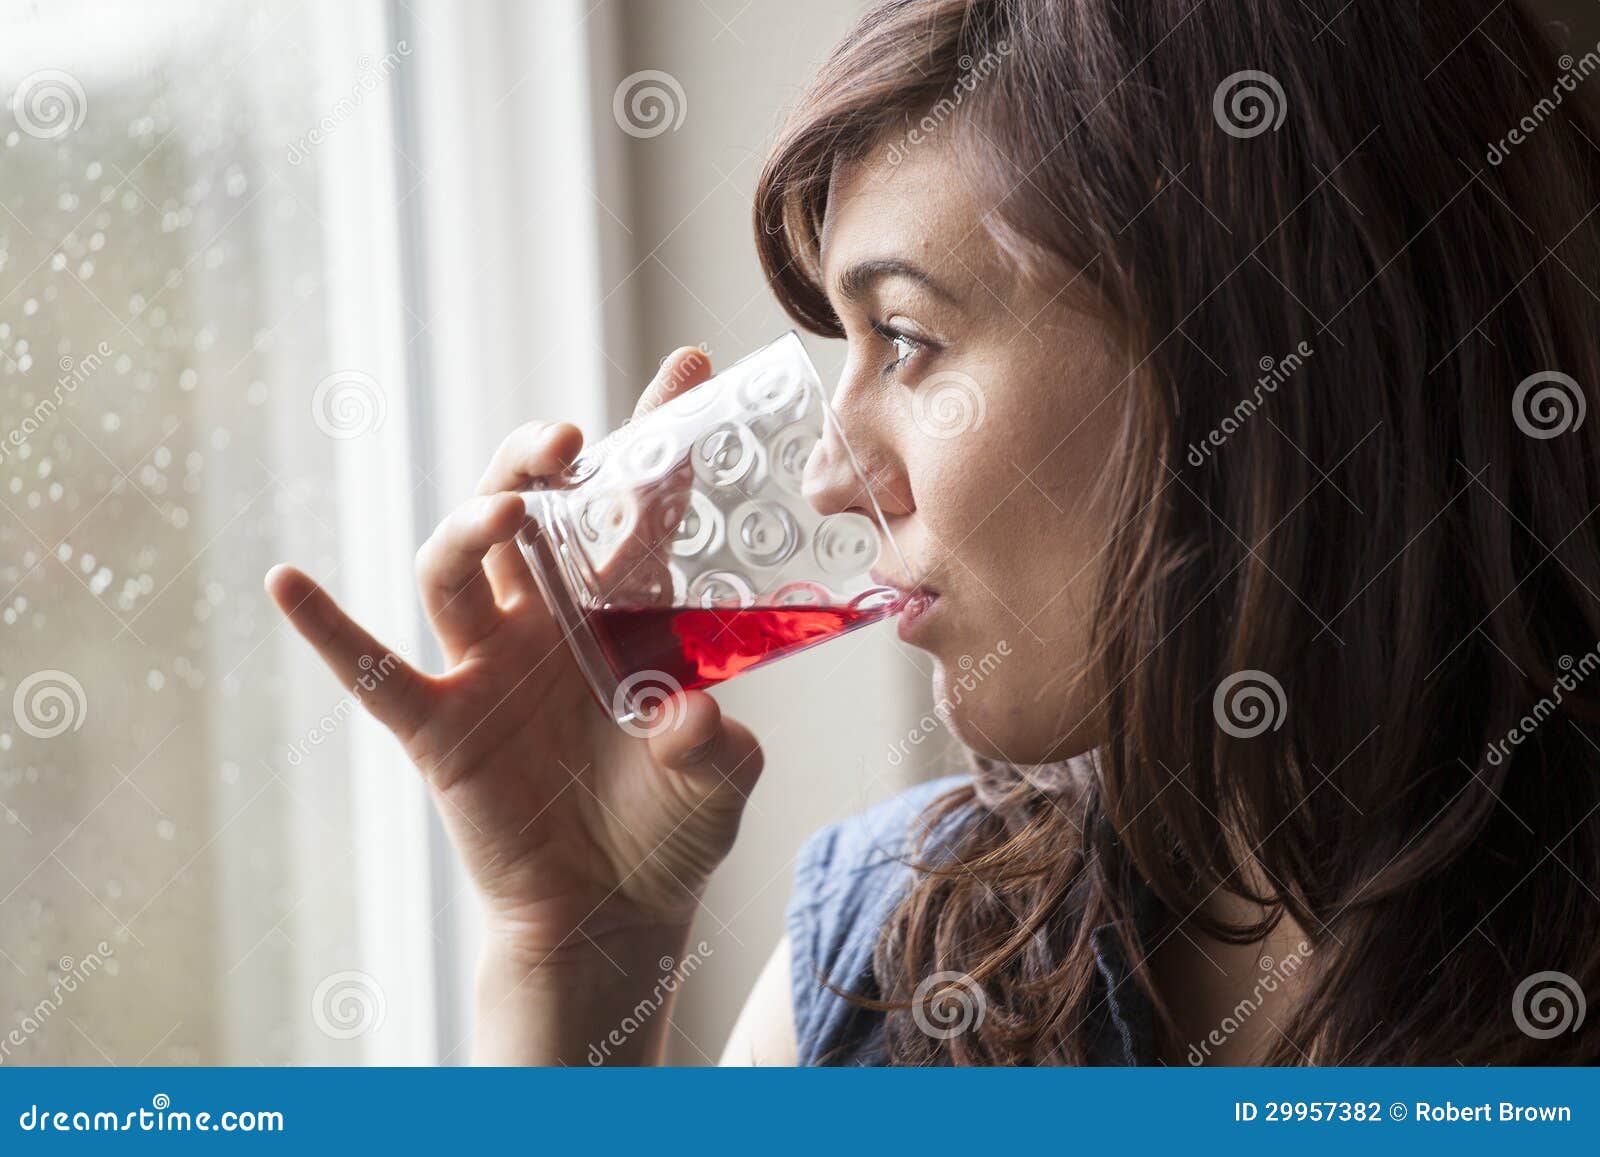 beautiful young woman drinking glass of cranberry juice